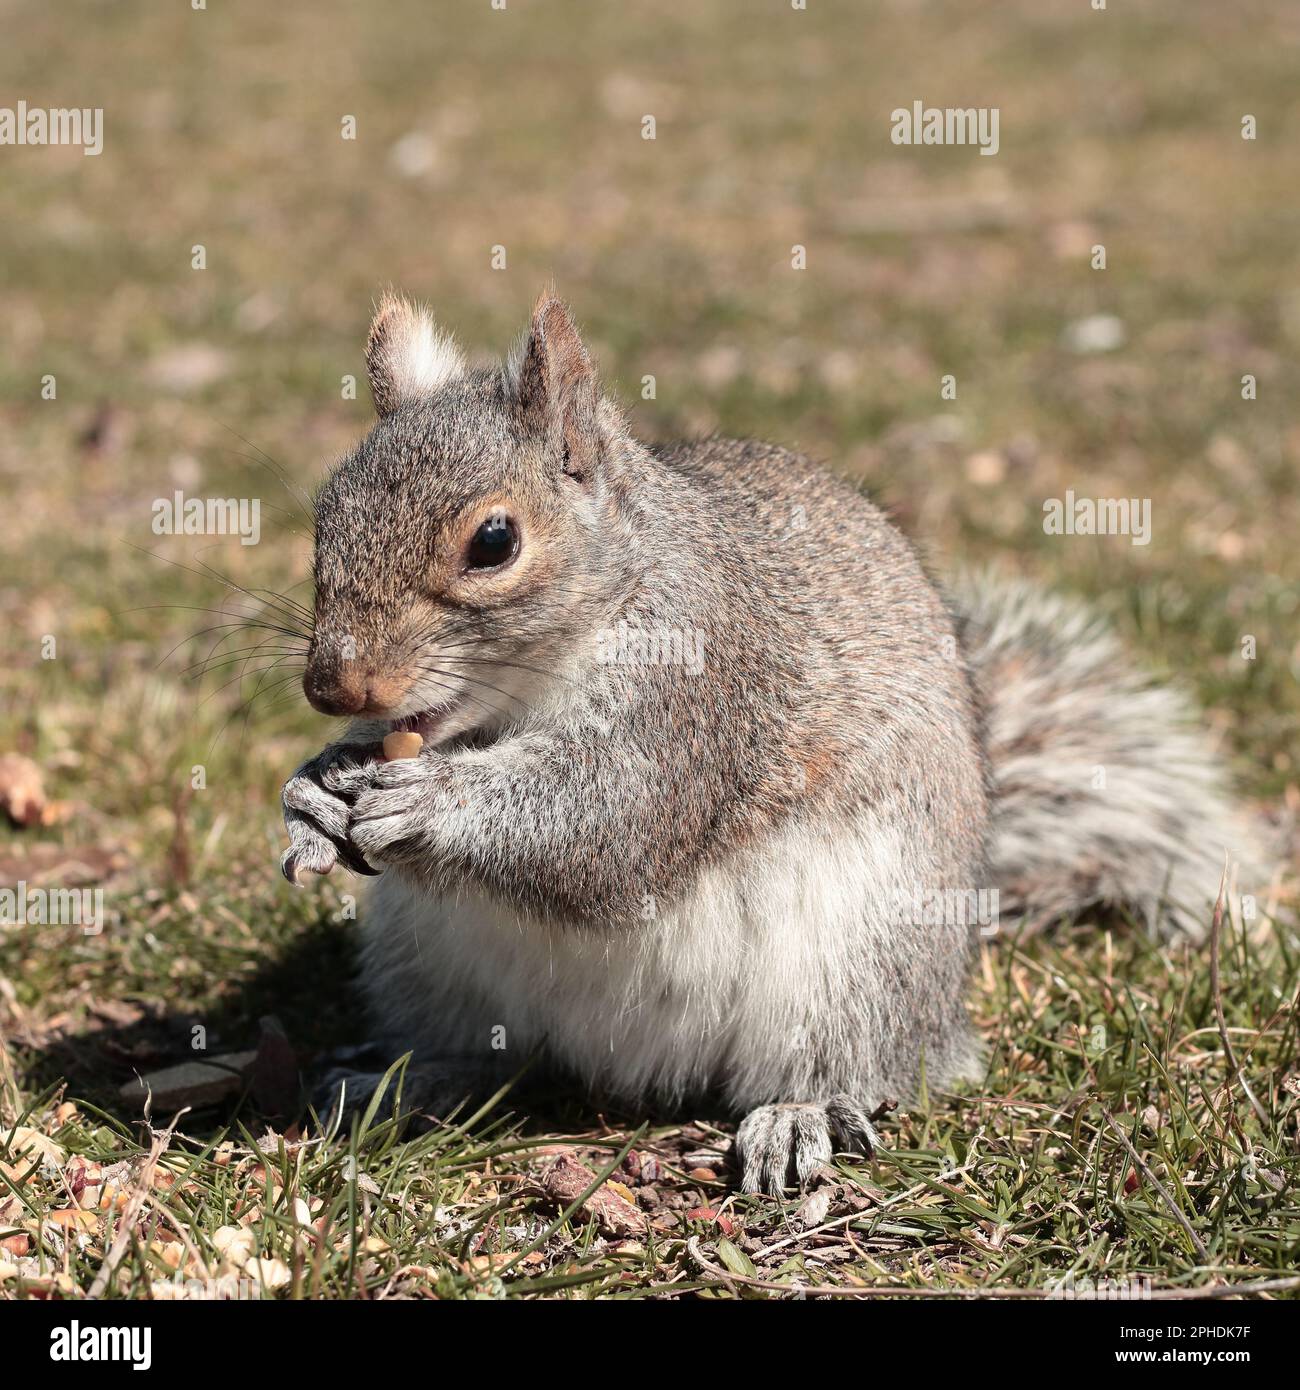 Up close shots of Wild Squirrel foraging Stock Photo